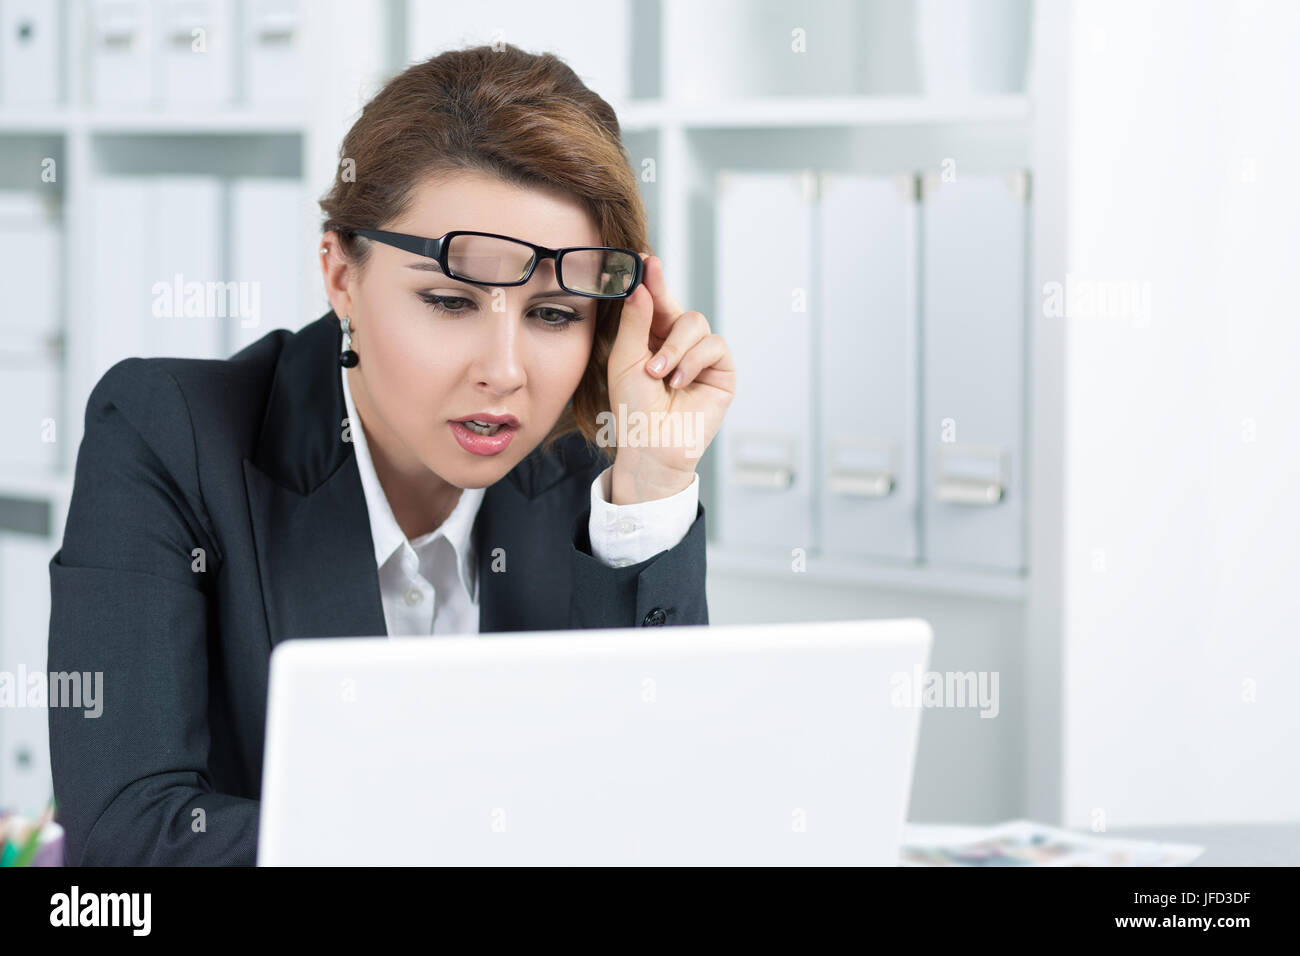 Young business woman looking intently at laptop monitor seeing something unusual Stock Photo